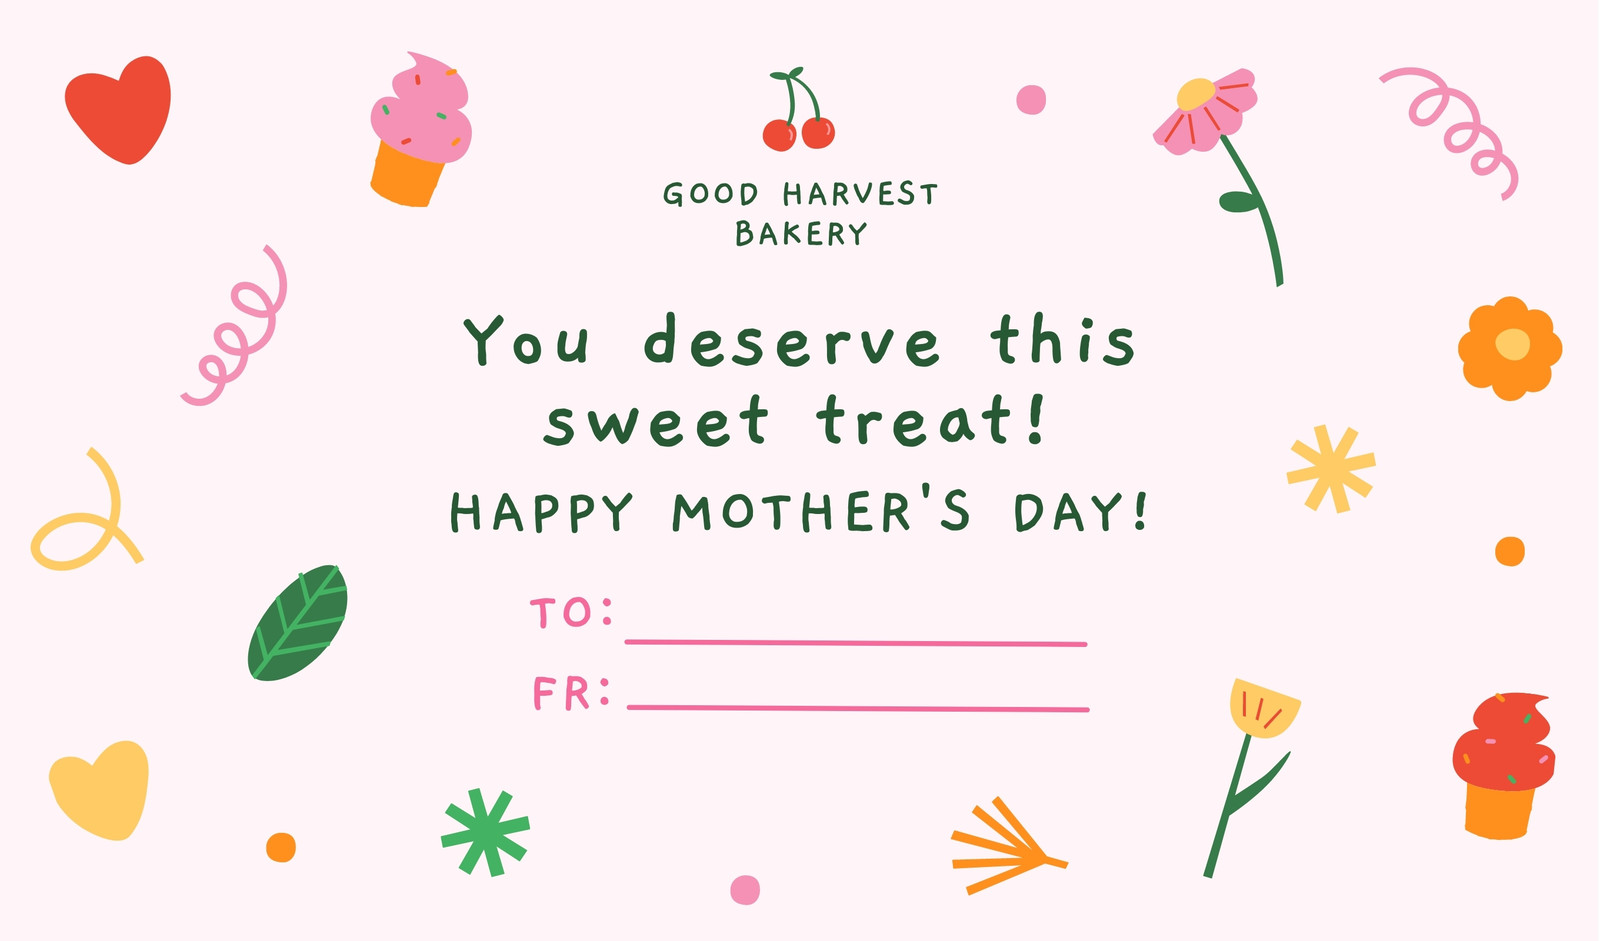 https://marketplace.canva.com/EAE7lc1GxKY/2/0/1600w/canva-pink-green-orange-cute-and-friendly-business-mother%27s-day-gift-tag-D6J10qte7RM.jpg